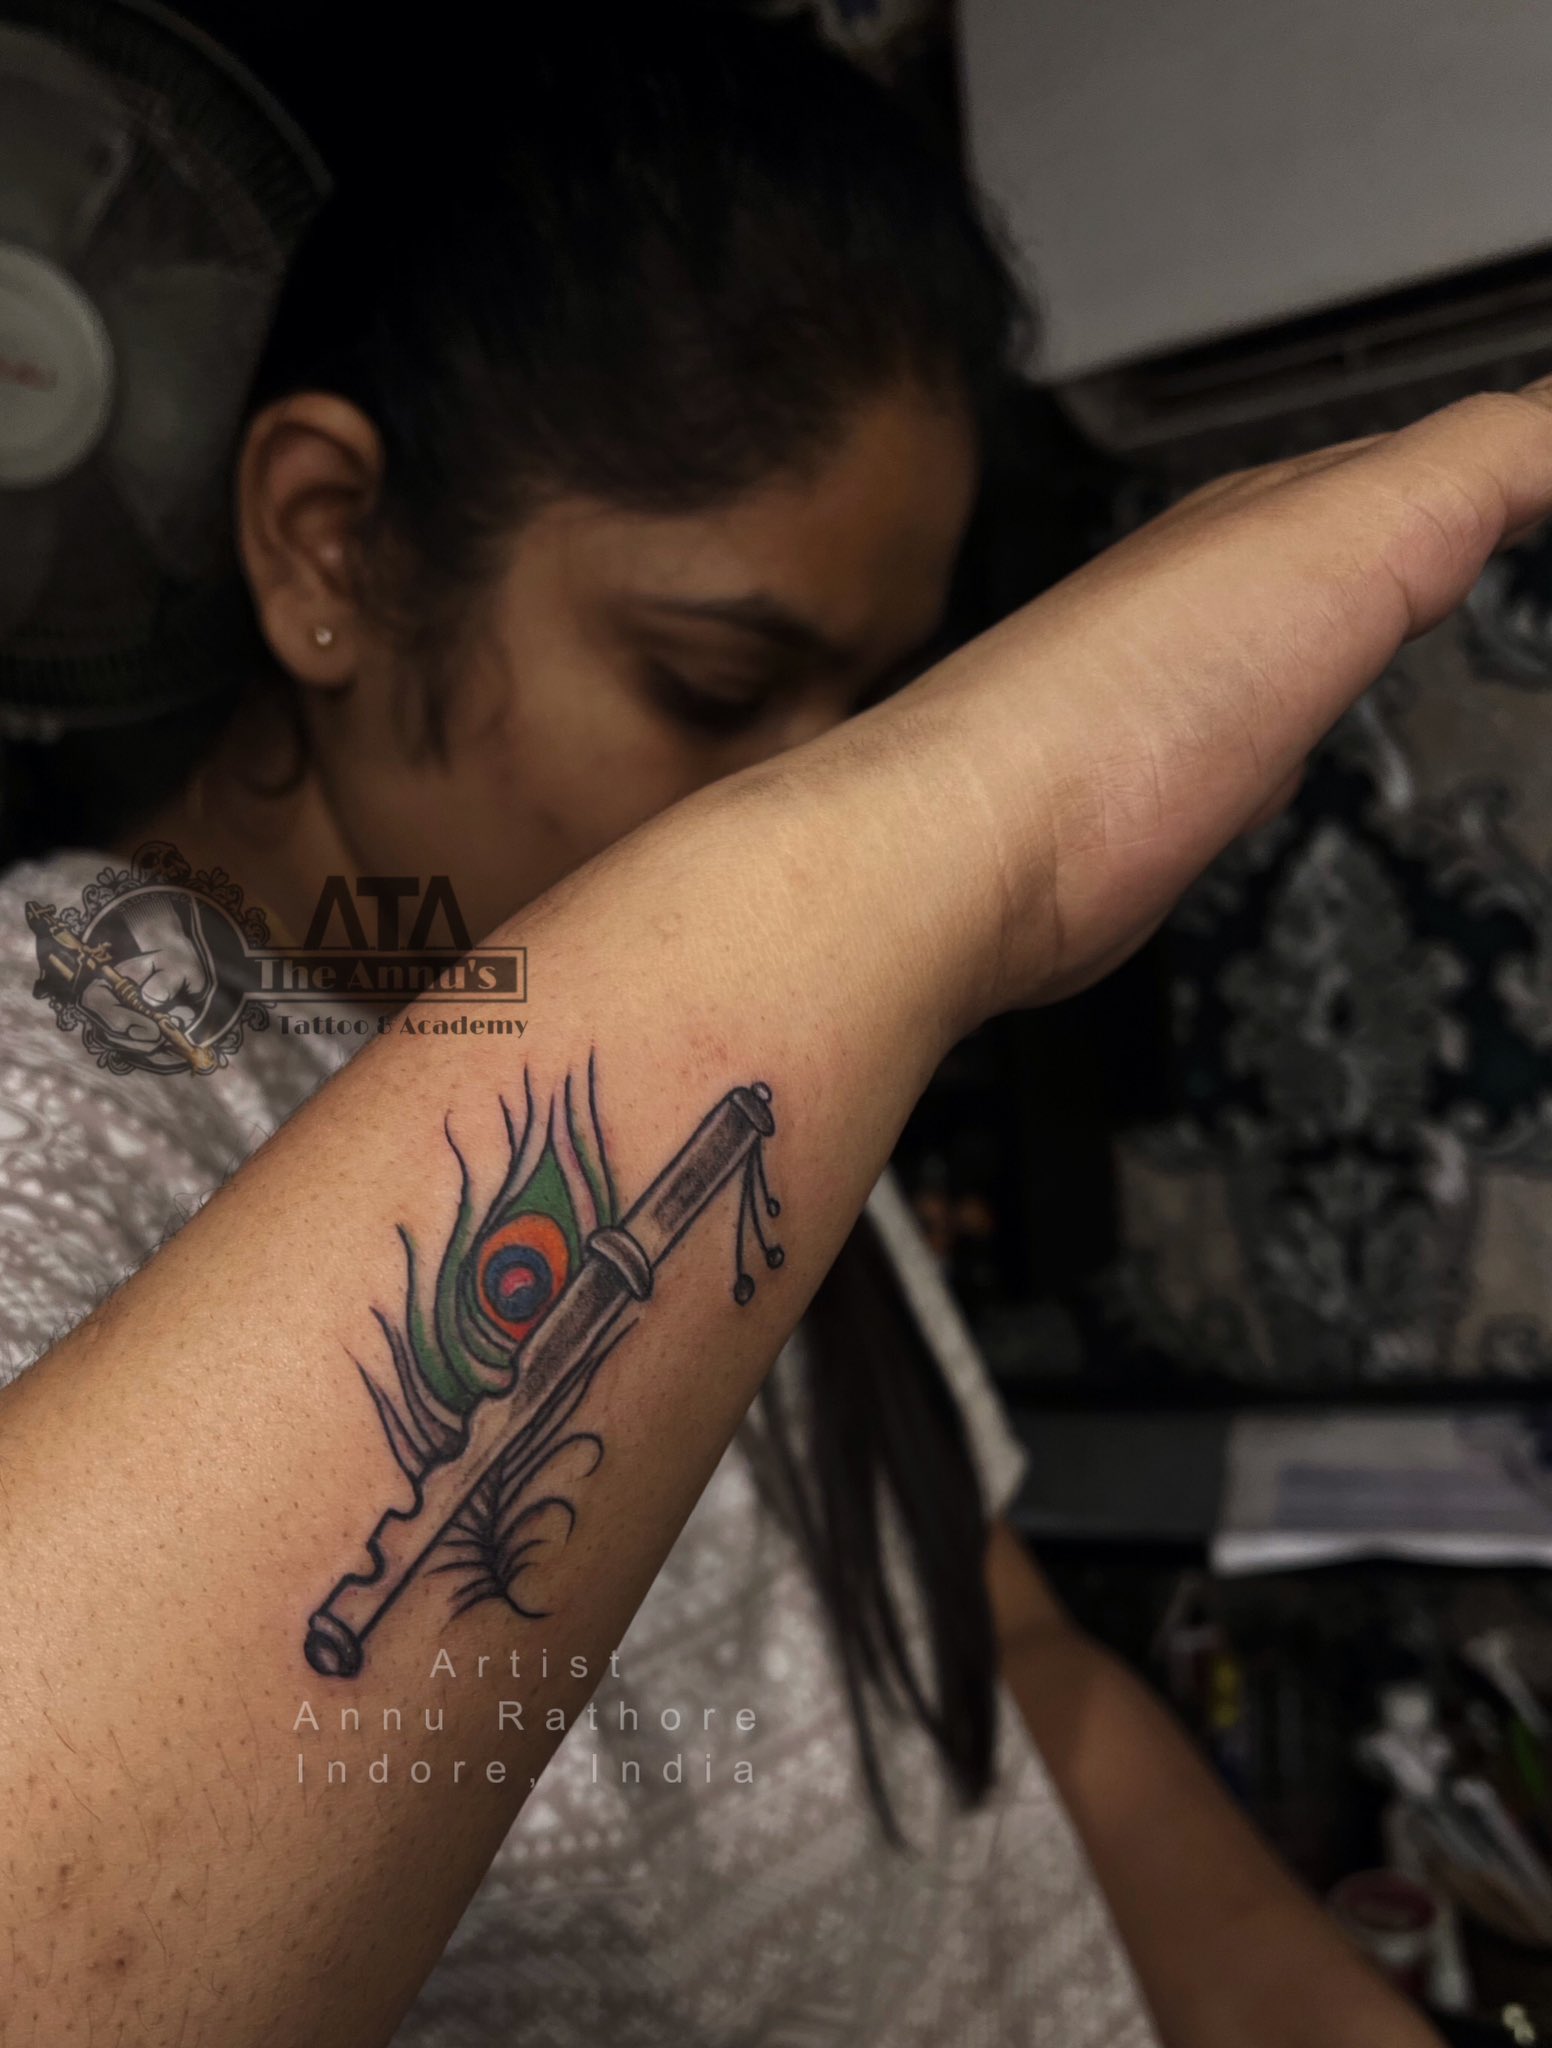 Peacock Feather With Flute Tattoo | Tattoo shop in ahmedabad, india | Flute  tattoo, Tattoos, Peacock feather tattoo